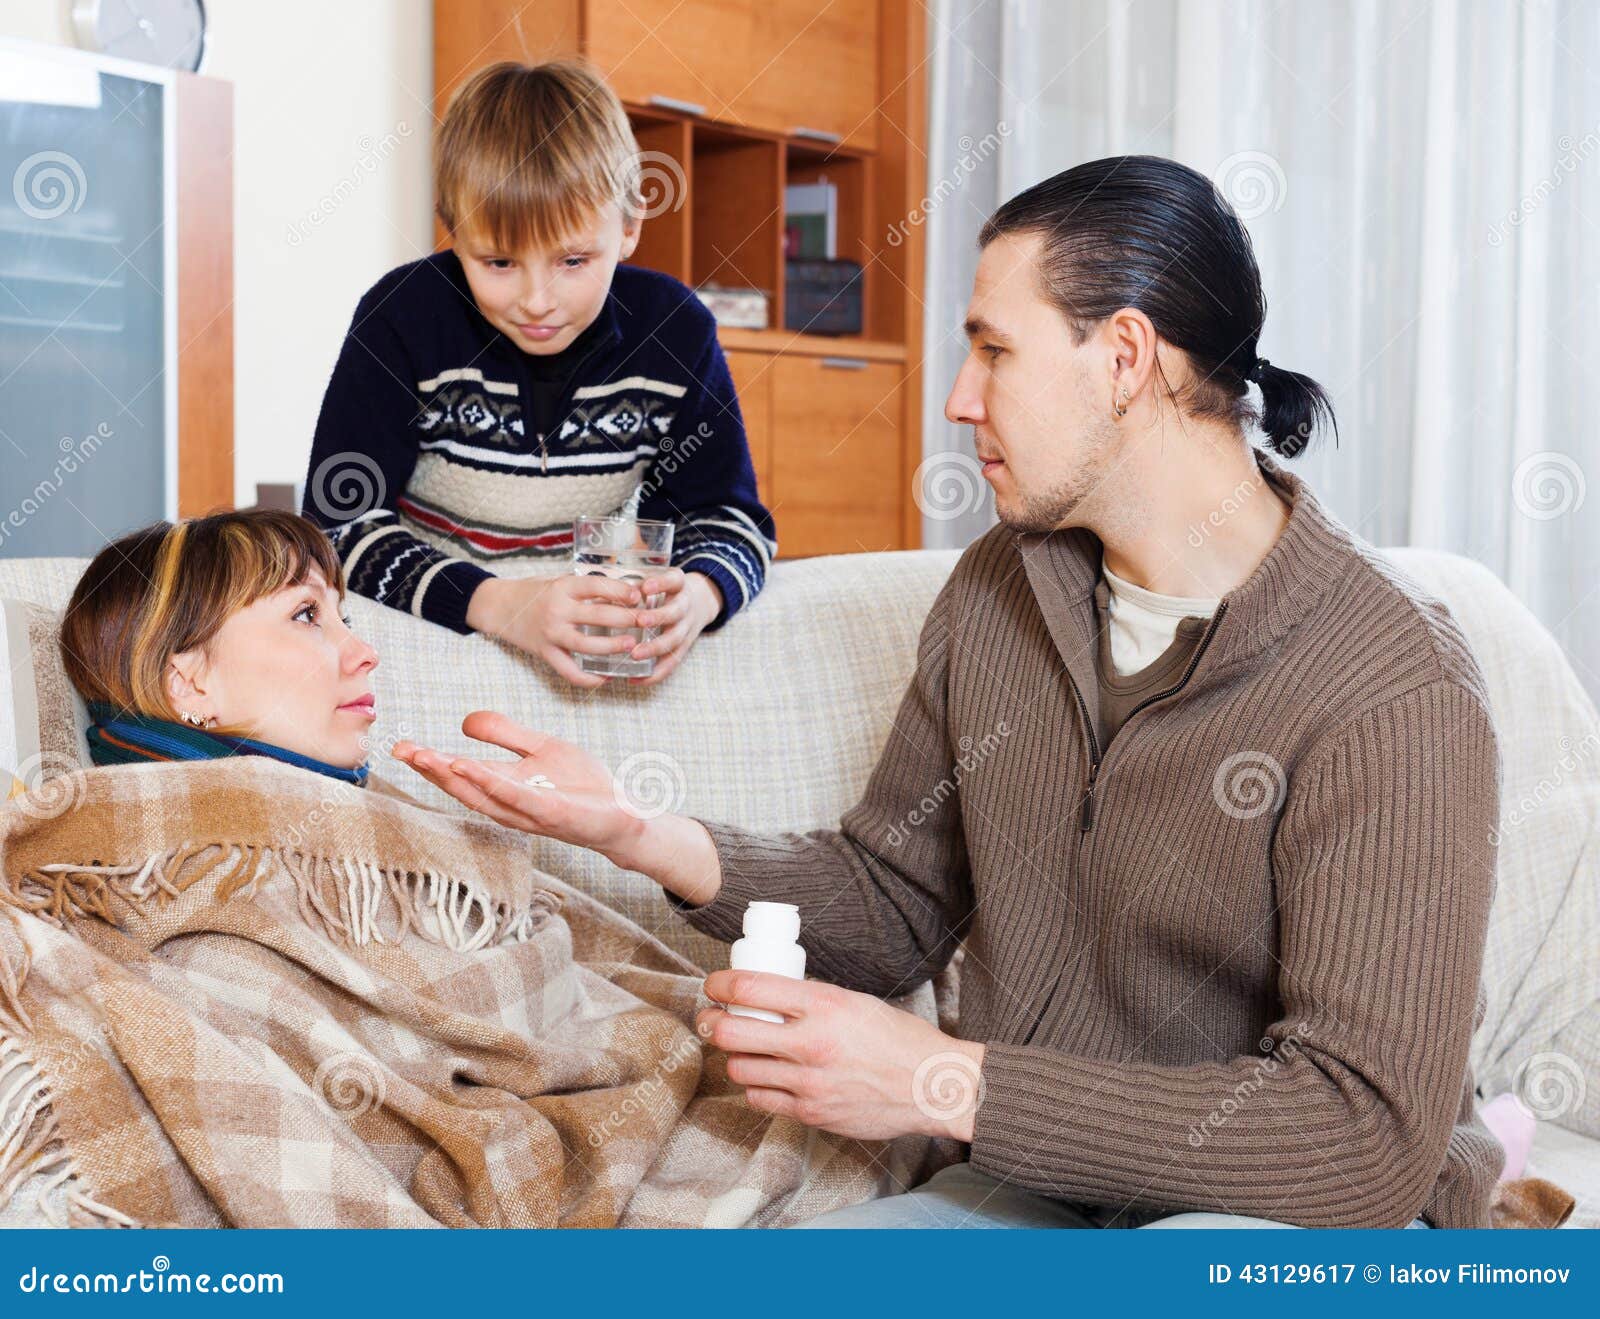 Man Caring For Sick Wife Son Helps Him Stock Image Image Of